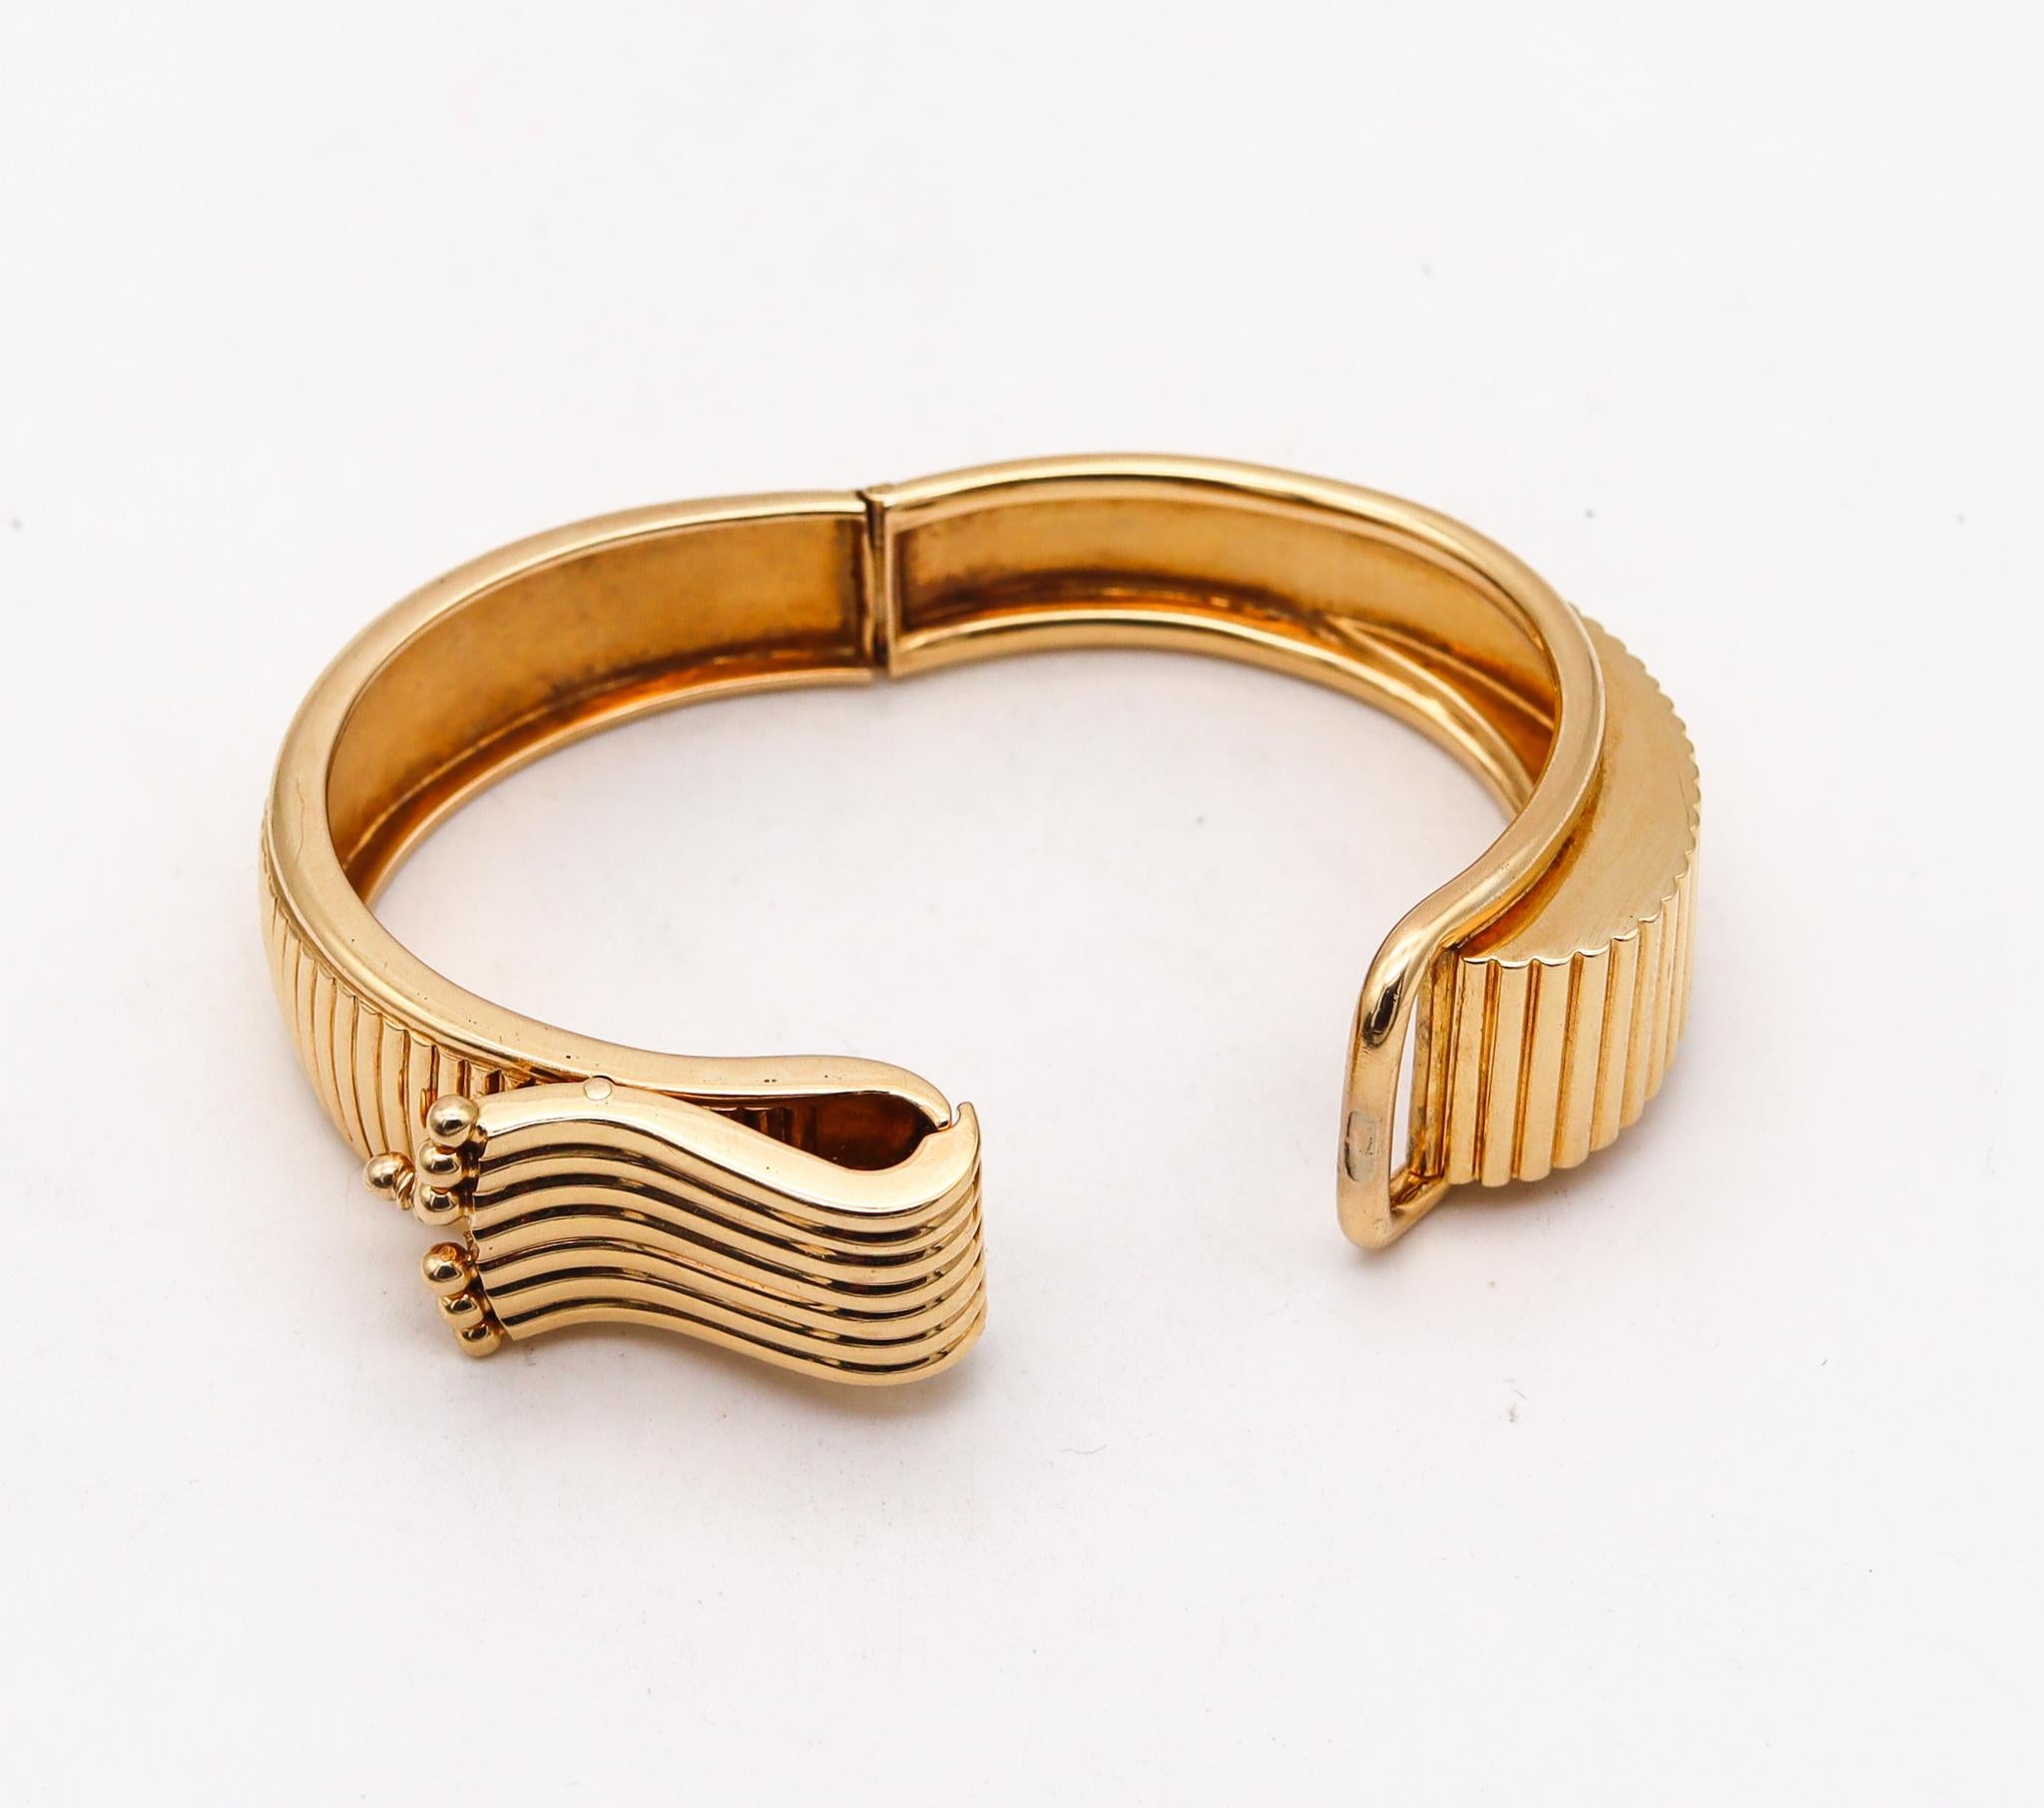 Art Deco 1930 Machine Age Geometric Bangle Bracelet in Solid 18Kt Yellow Gold For Sale 1